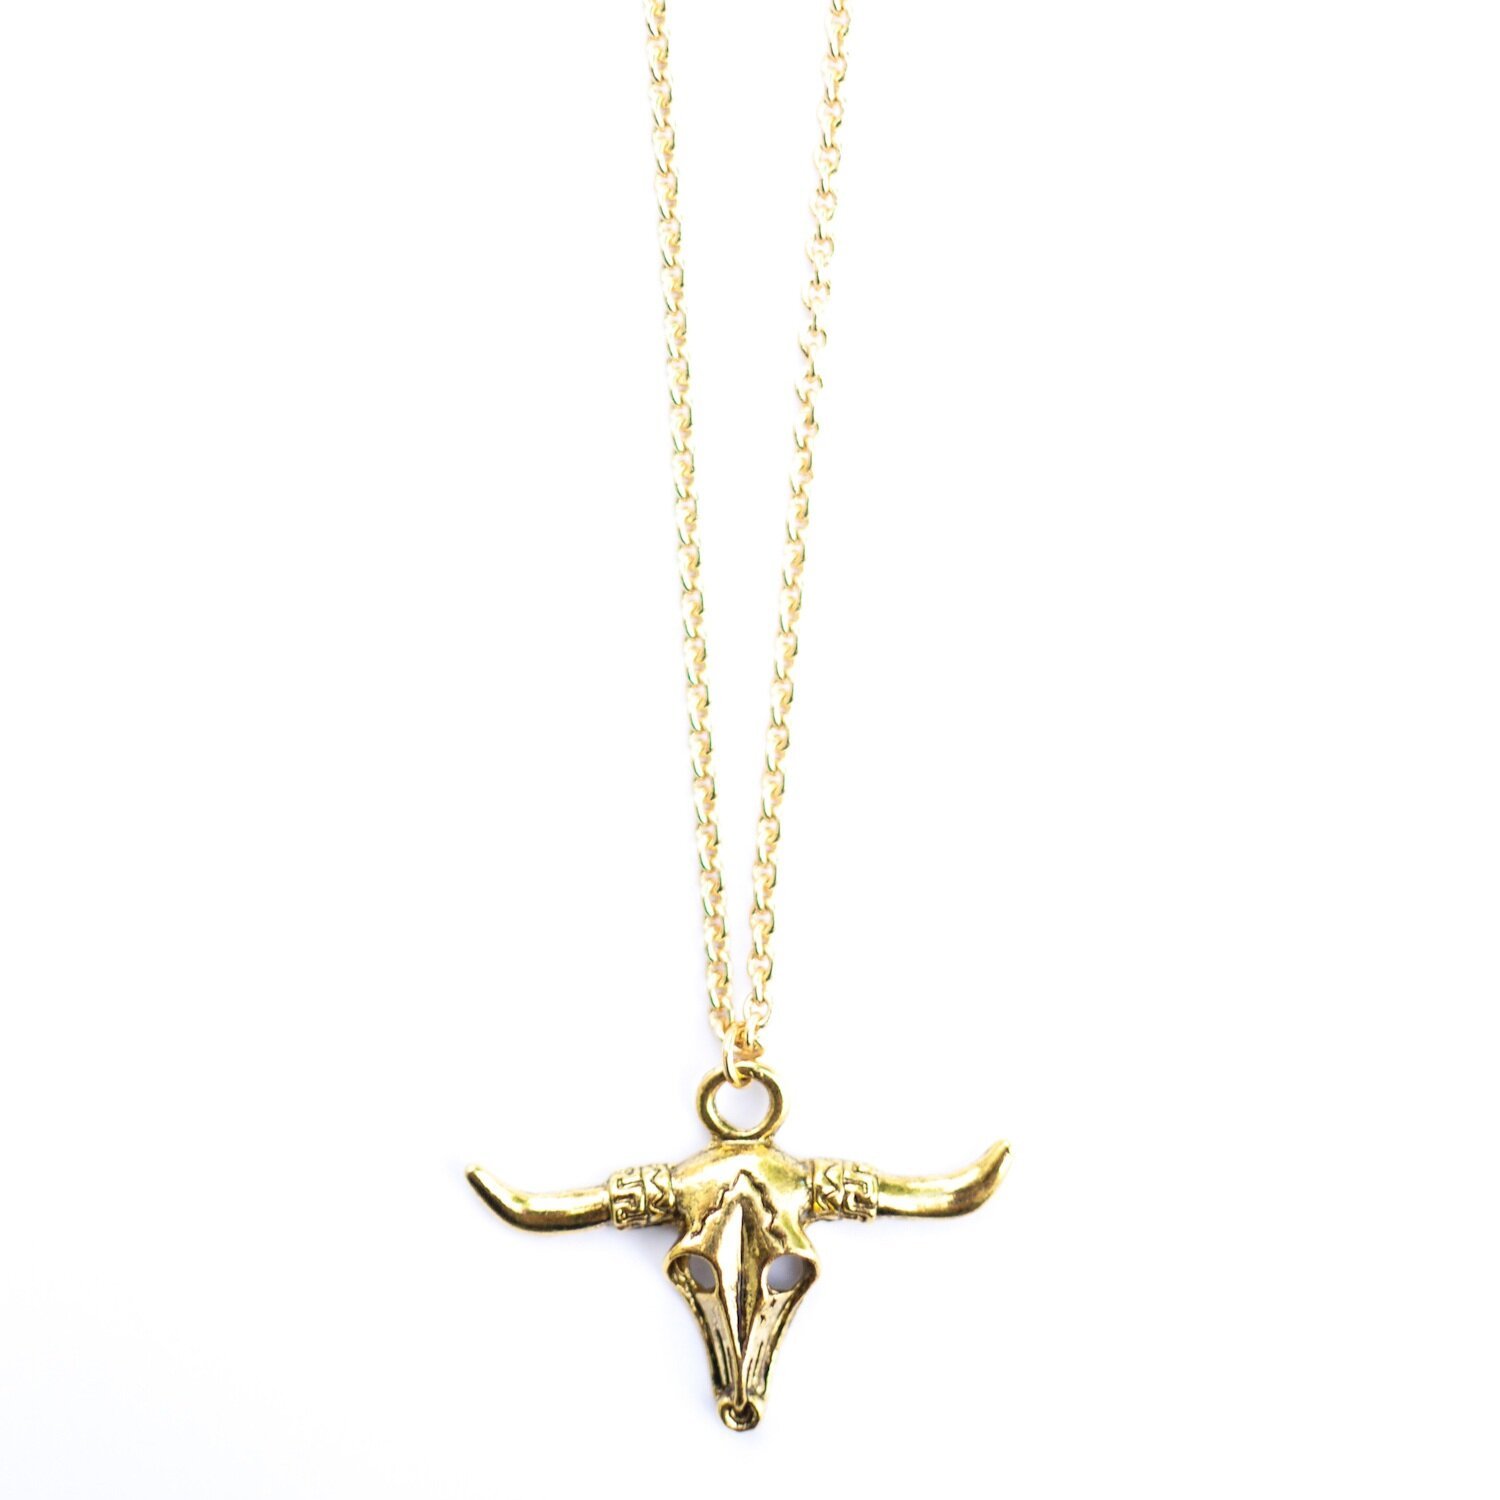 $29.99 THE GILDED LONGHORN NECKLACE